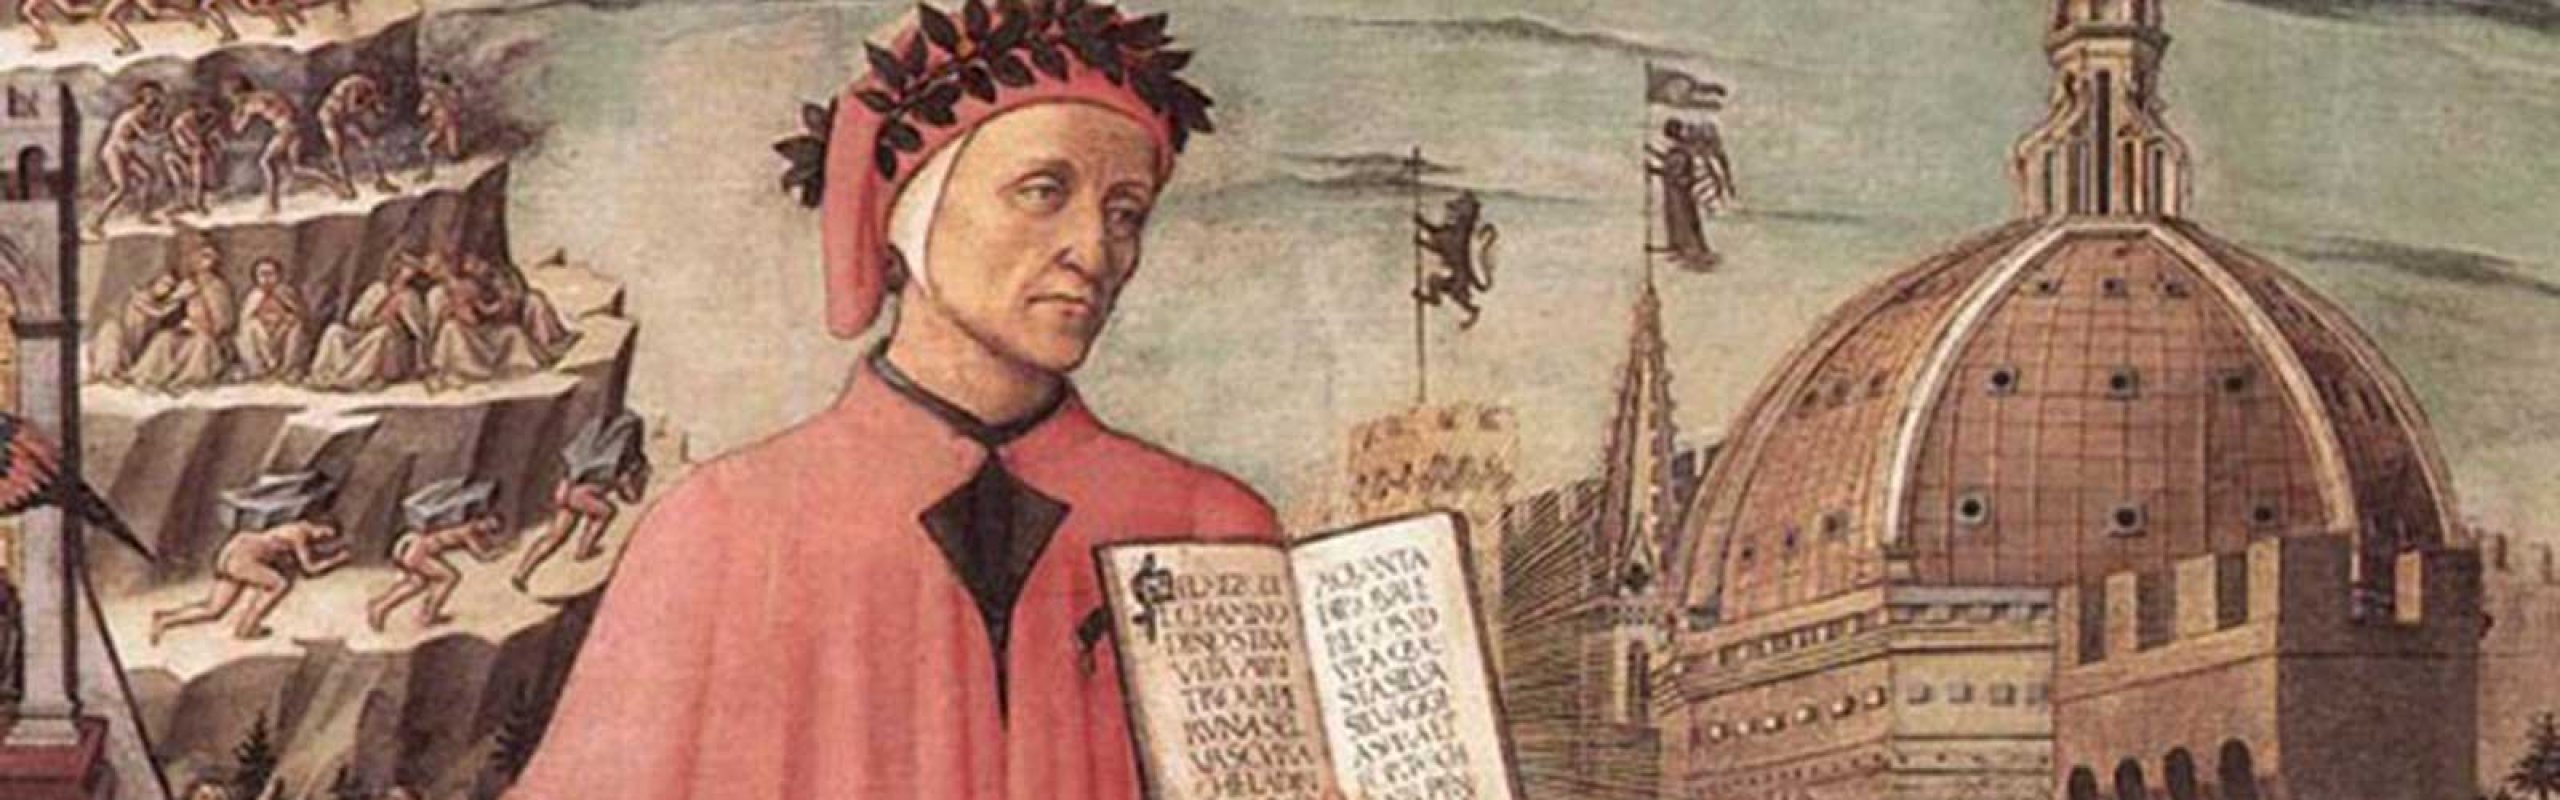 Dante and Lady Philosophy